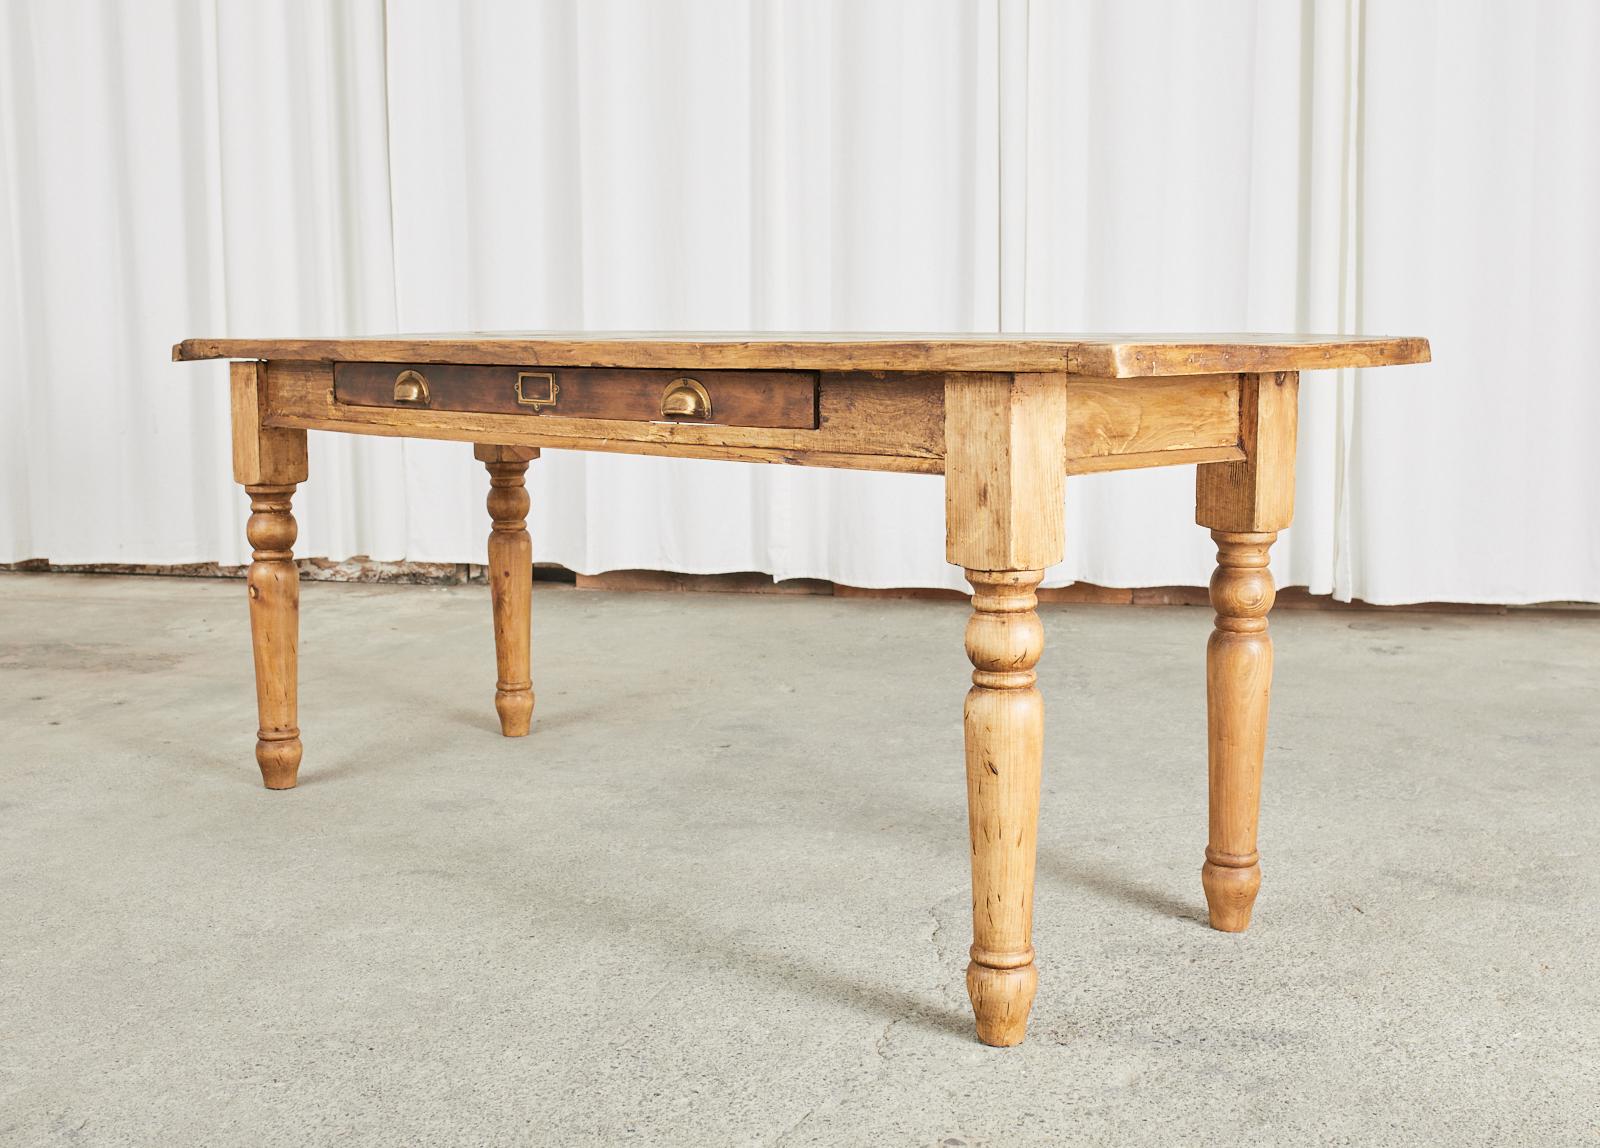 Rustic country English farmhouse dining table or harvest table that could also serve as a console, desk, or writing table. The table features a 1 inch thick plank top with breadboard ends. There is a large storage drawer on the front frieze with a